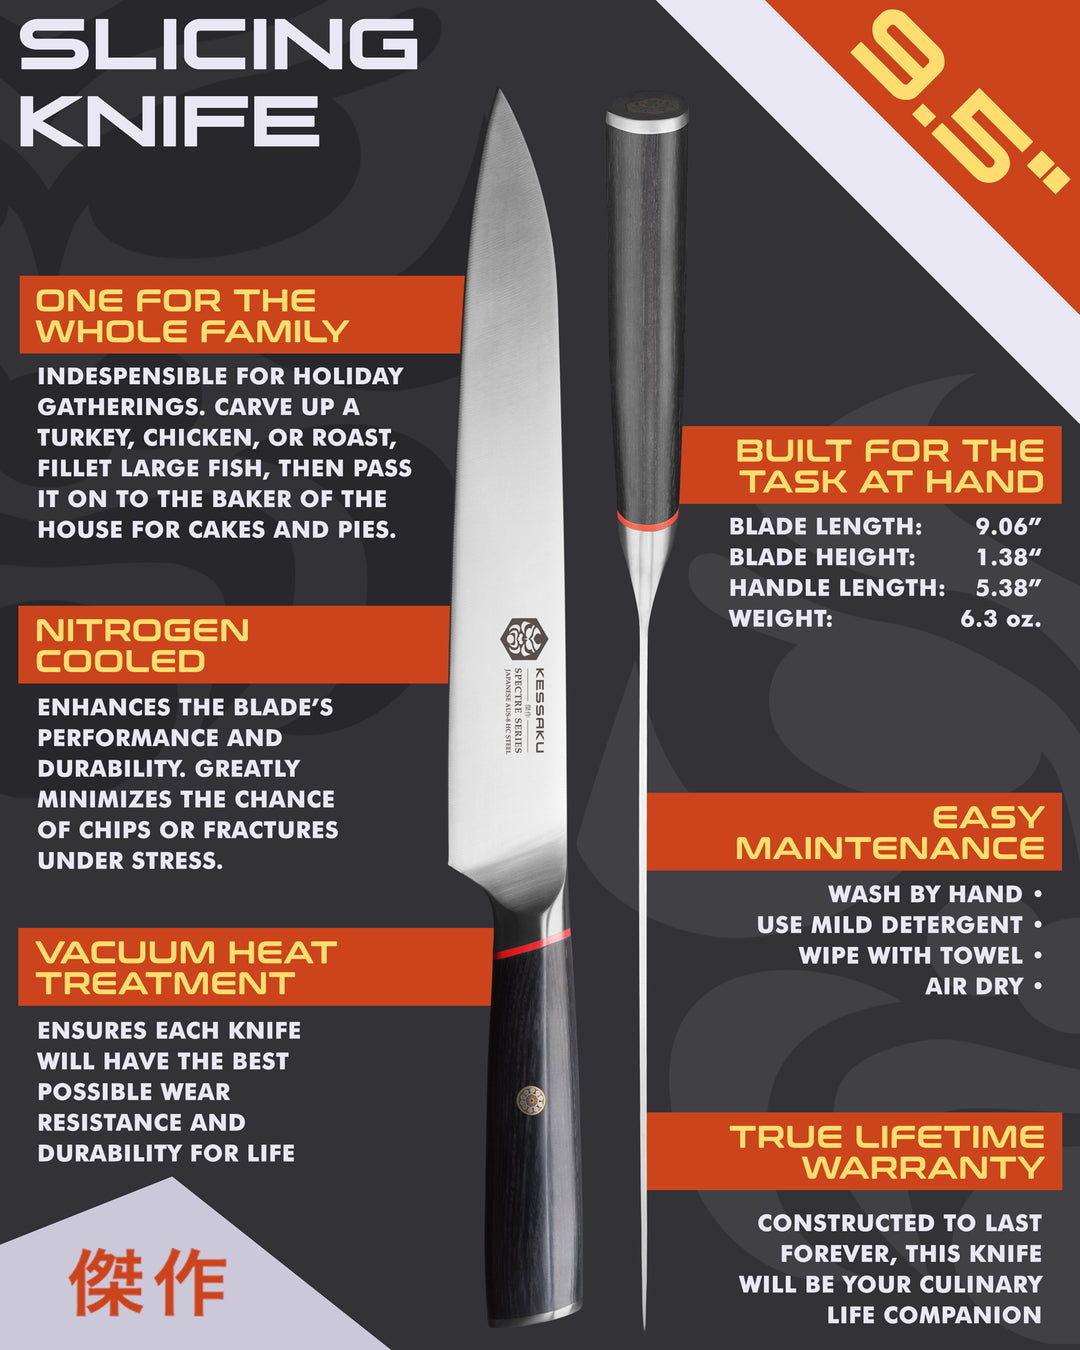 Kessaku Spectre 9.5-In. Slicing Knife uses, dimensions, maintenance, warranty info, and additional blade treatments